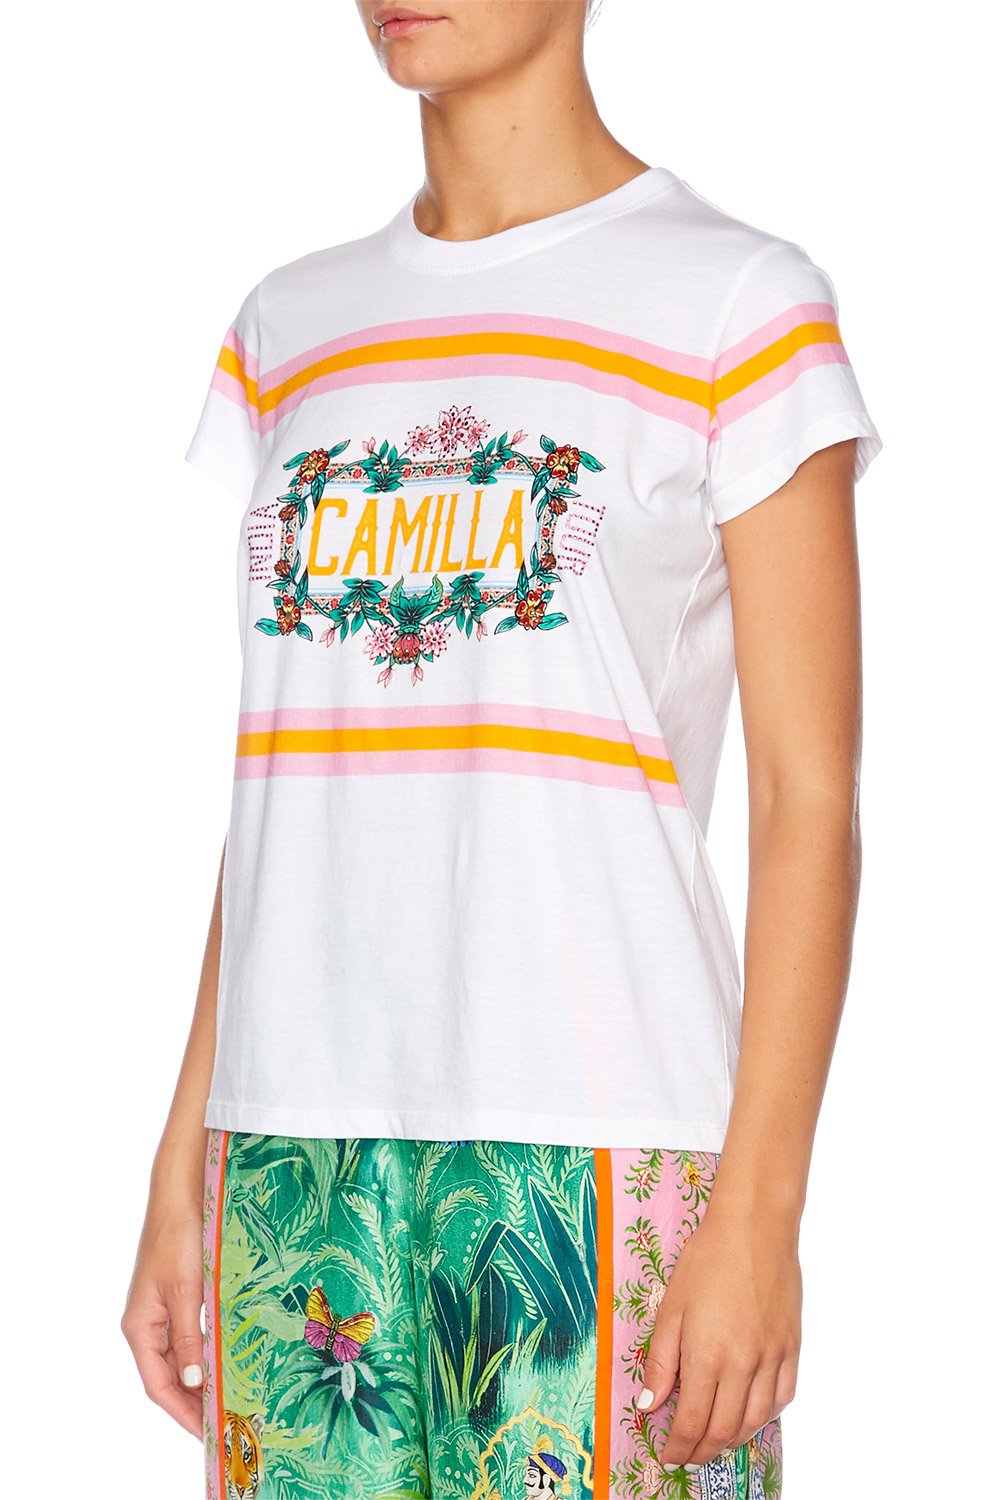 THE JUNGLE BOOK SLIM FIT ROUND NECK T-SHIRT